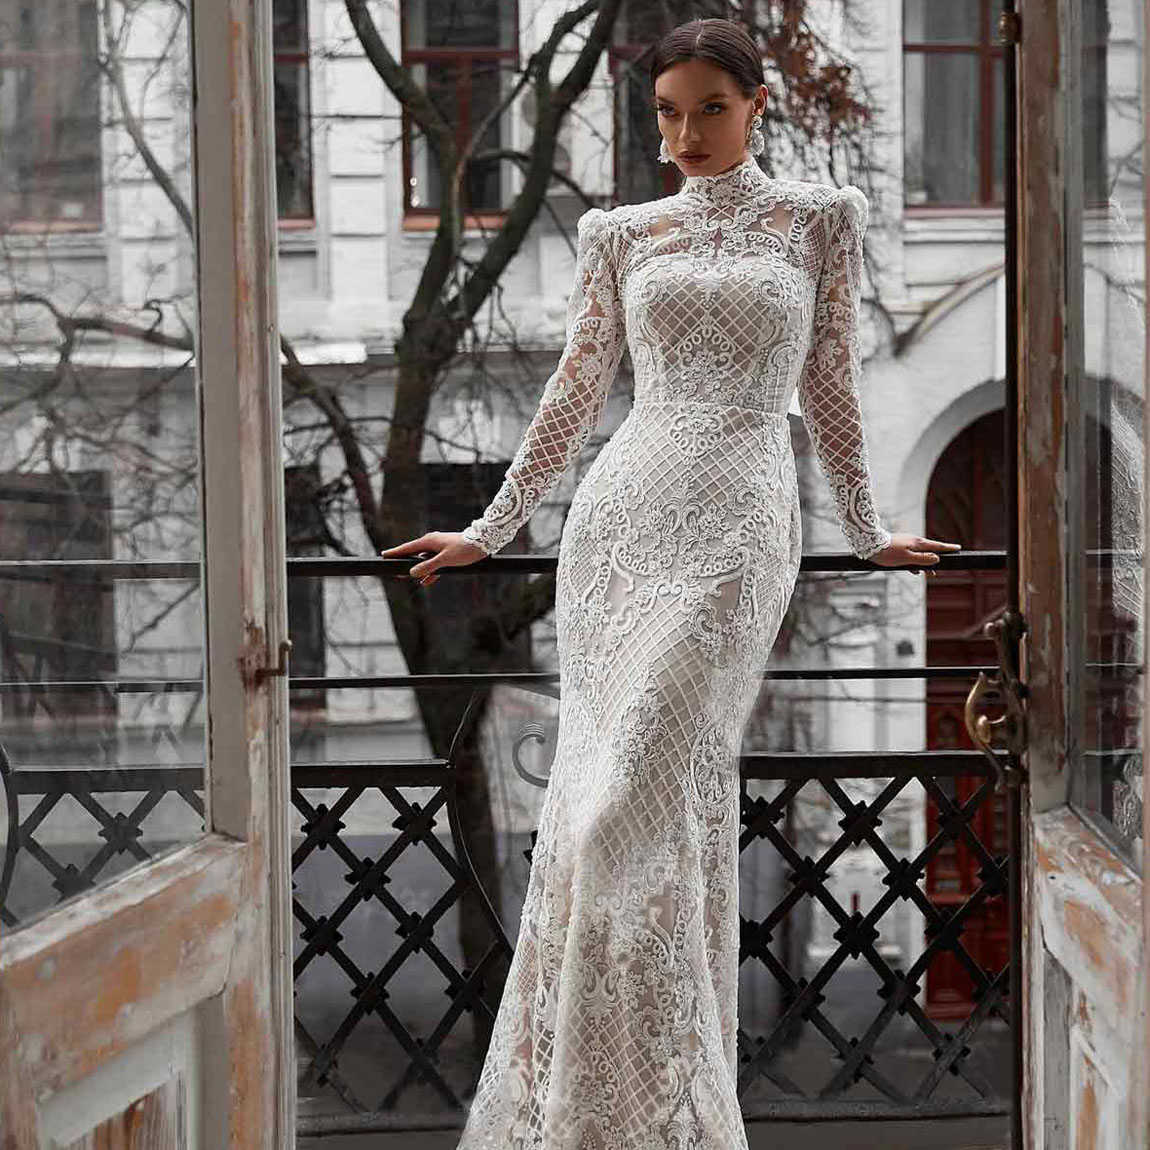 Sheer Long Sleeves Lace Applique Flowers Beaded Wedding Dresses Bridal Gowns New 